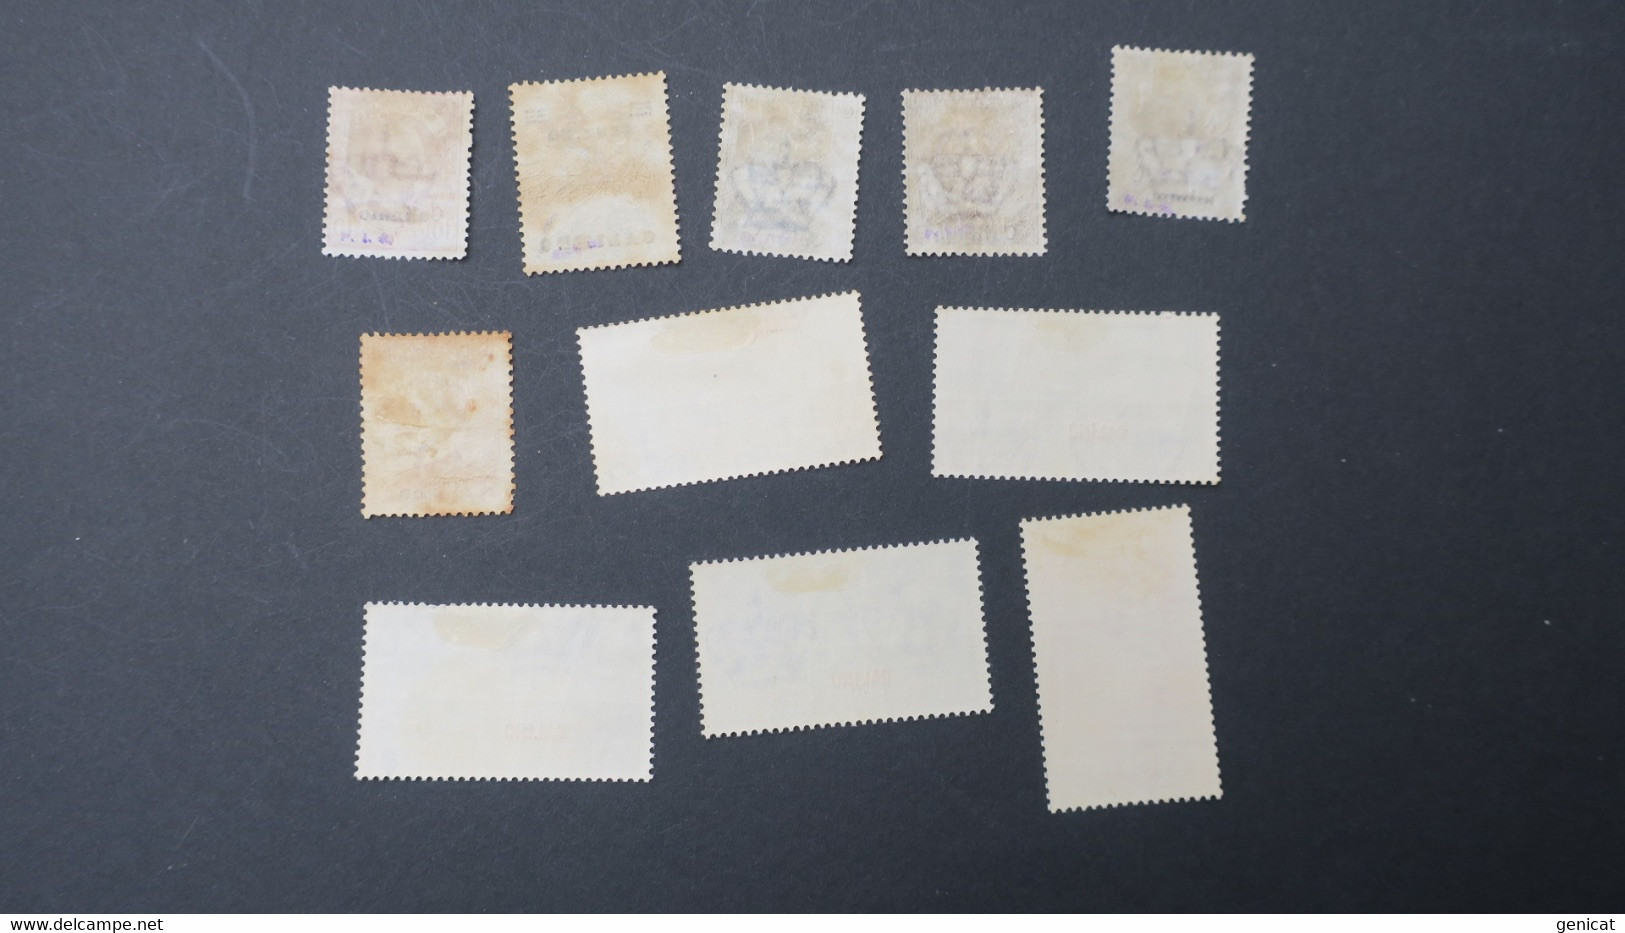 Egée Calino Colonies Italiennes Lot 11 Timbres Neuf * Voir Scans - Aegean (Calino)